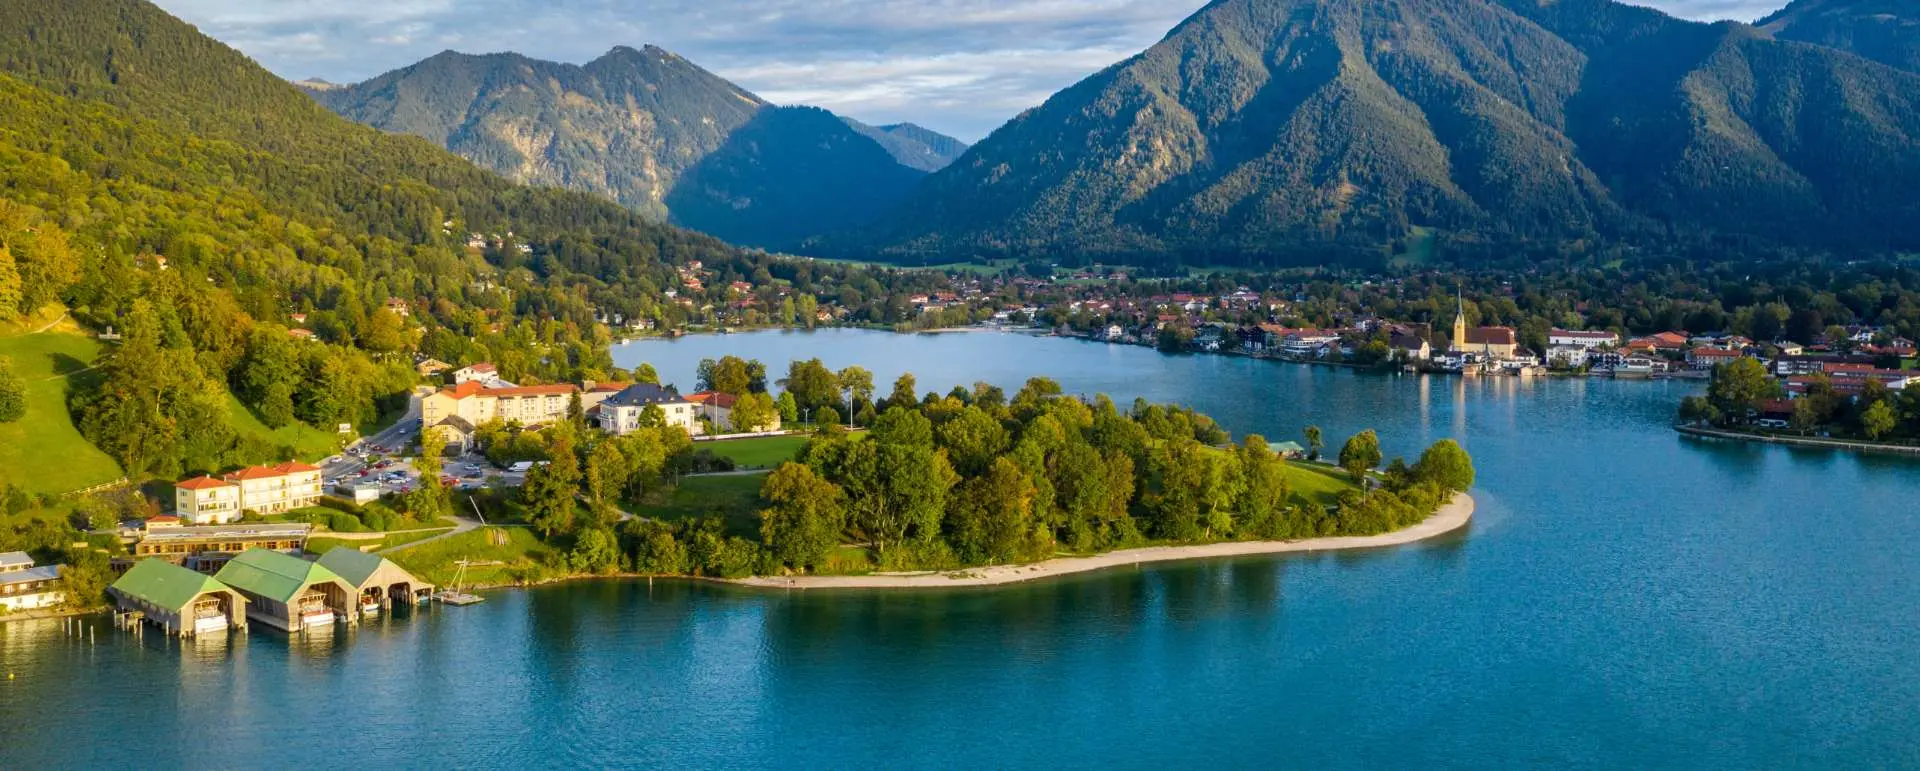 Tegernsee - the destination for clubs